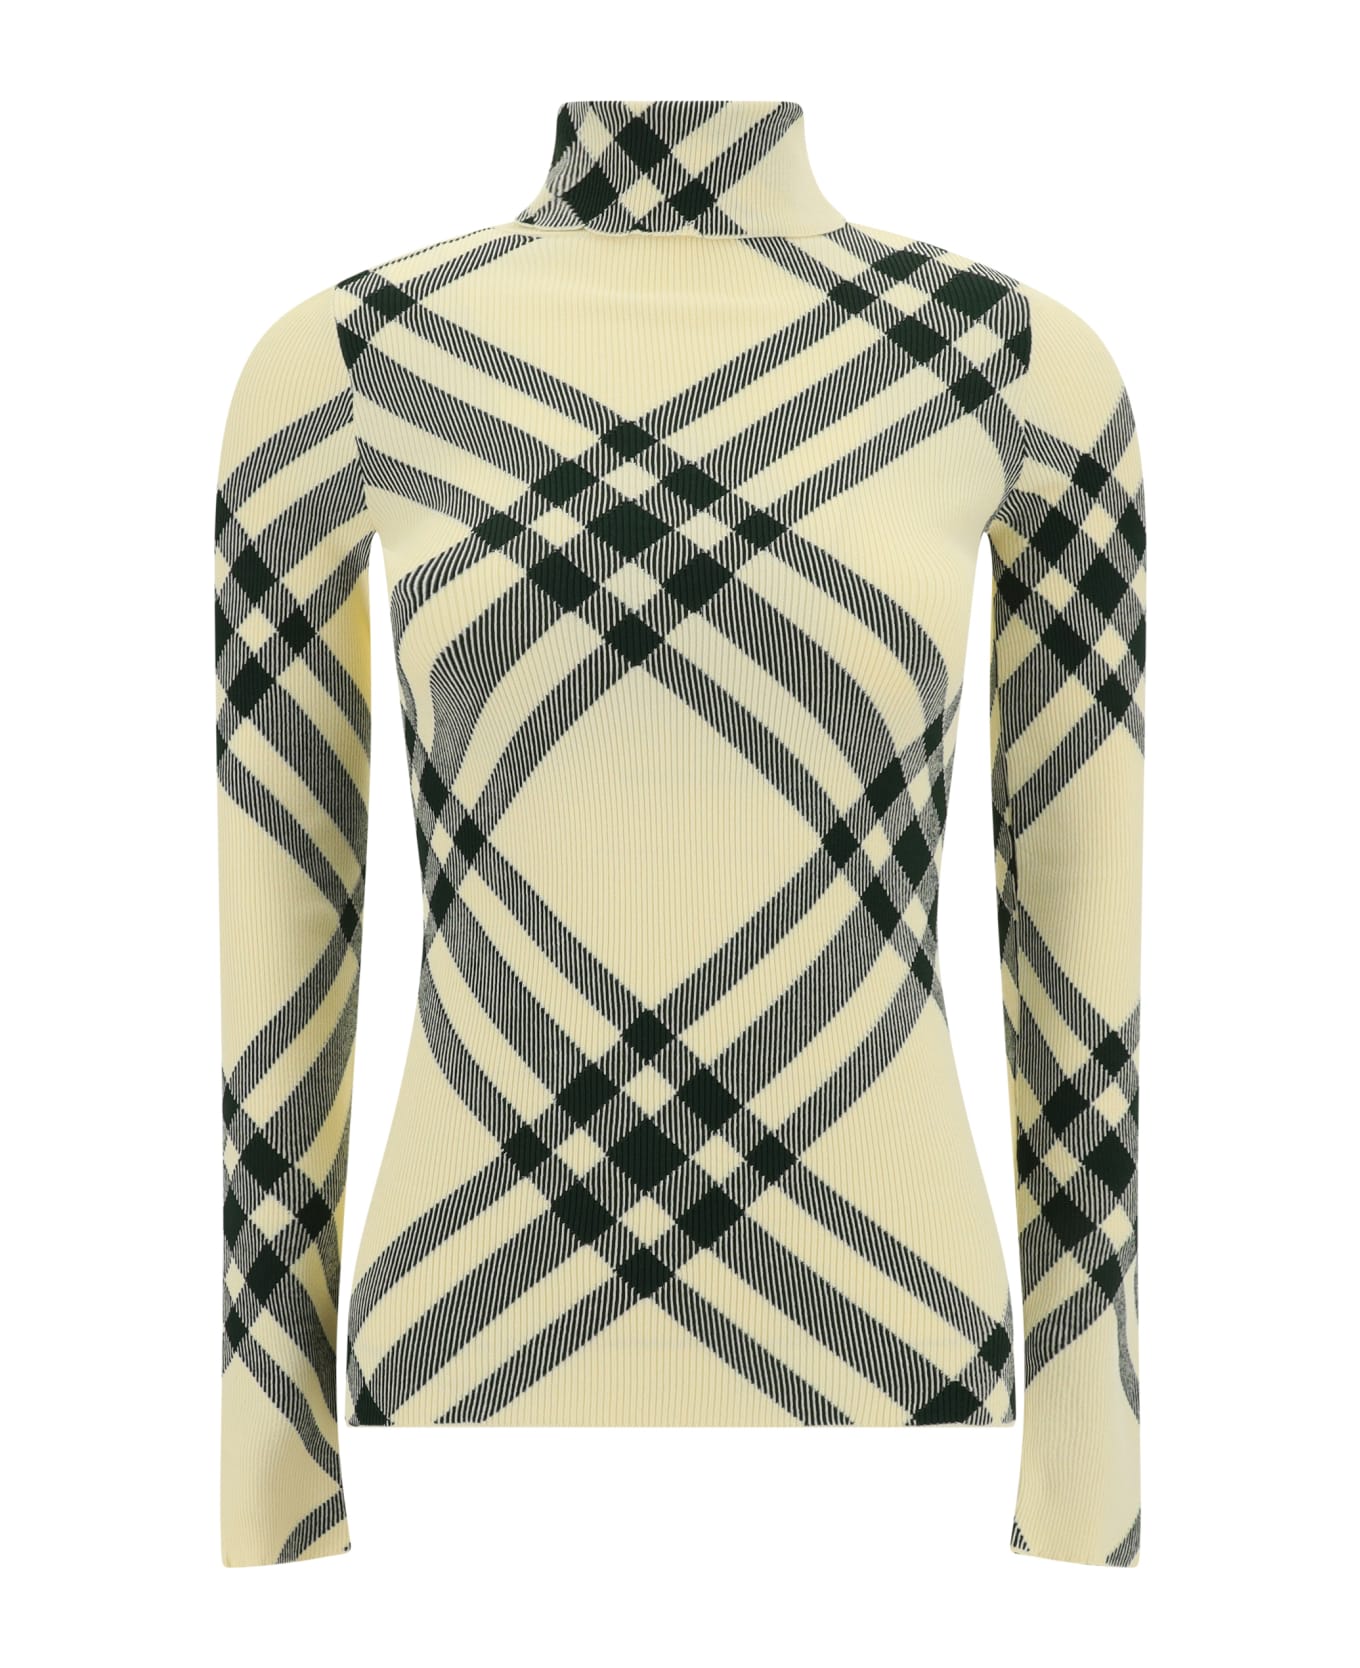 Burberry Sweater - Ivy ip check